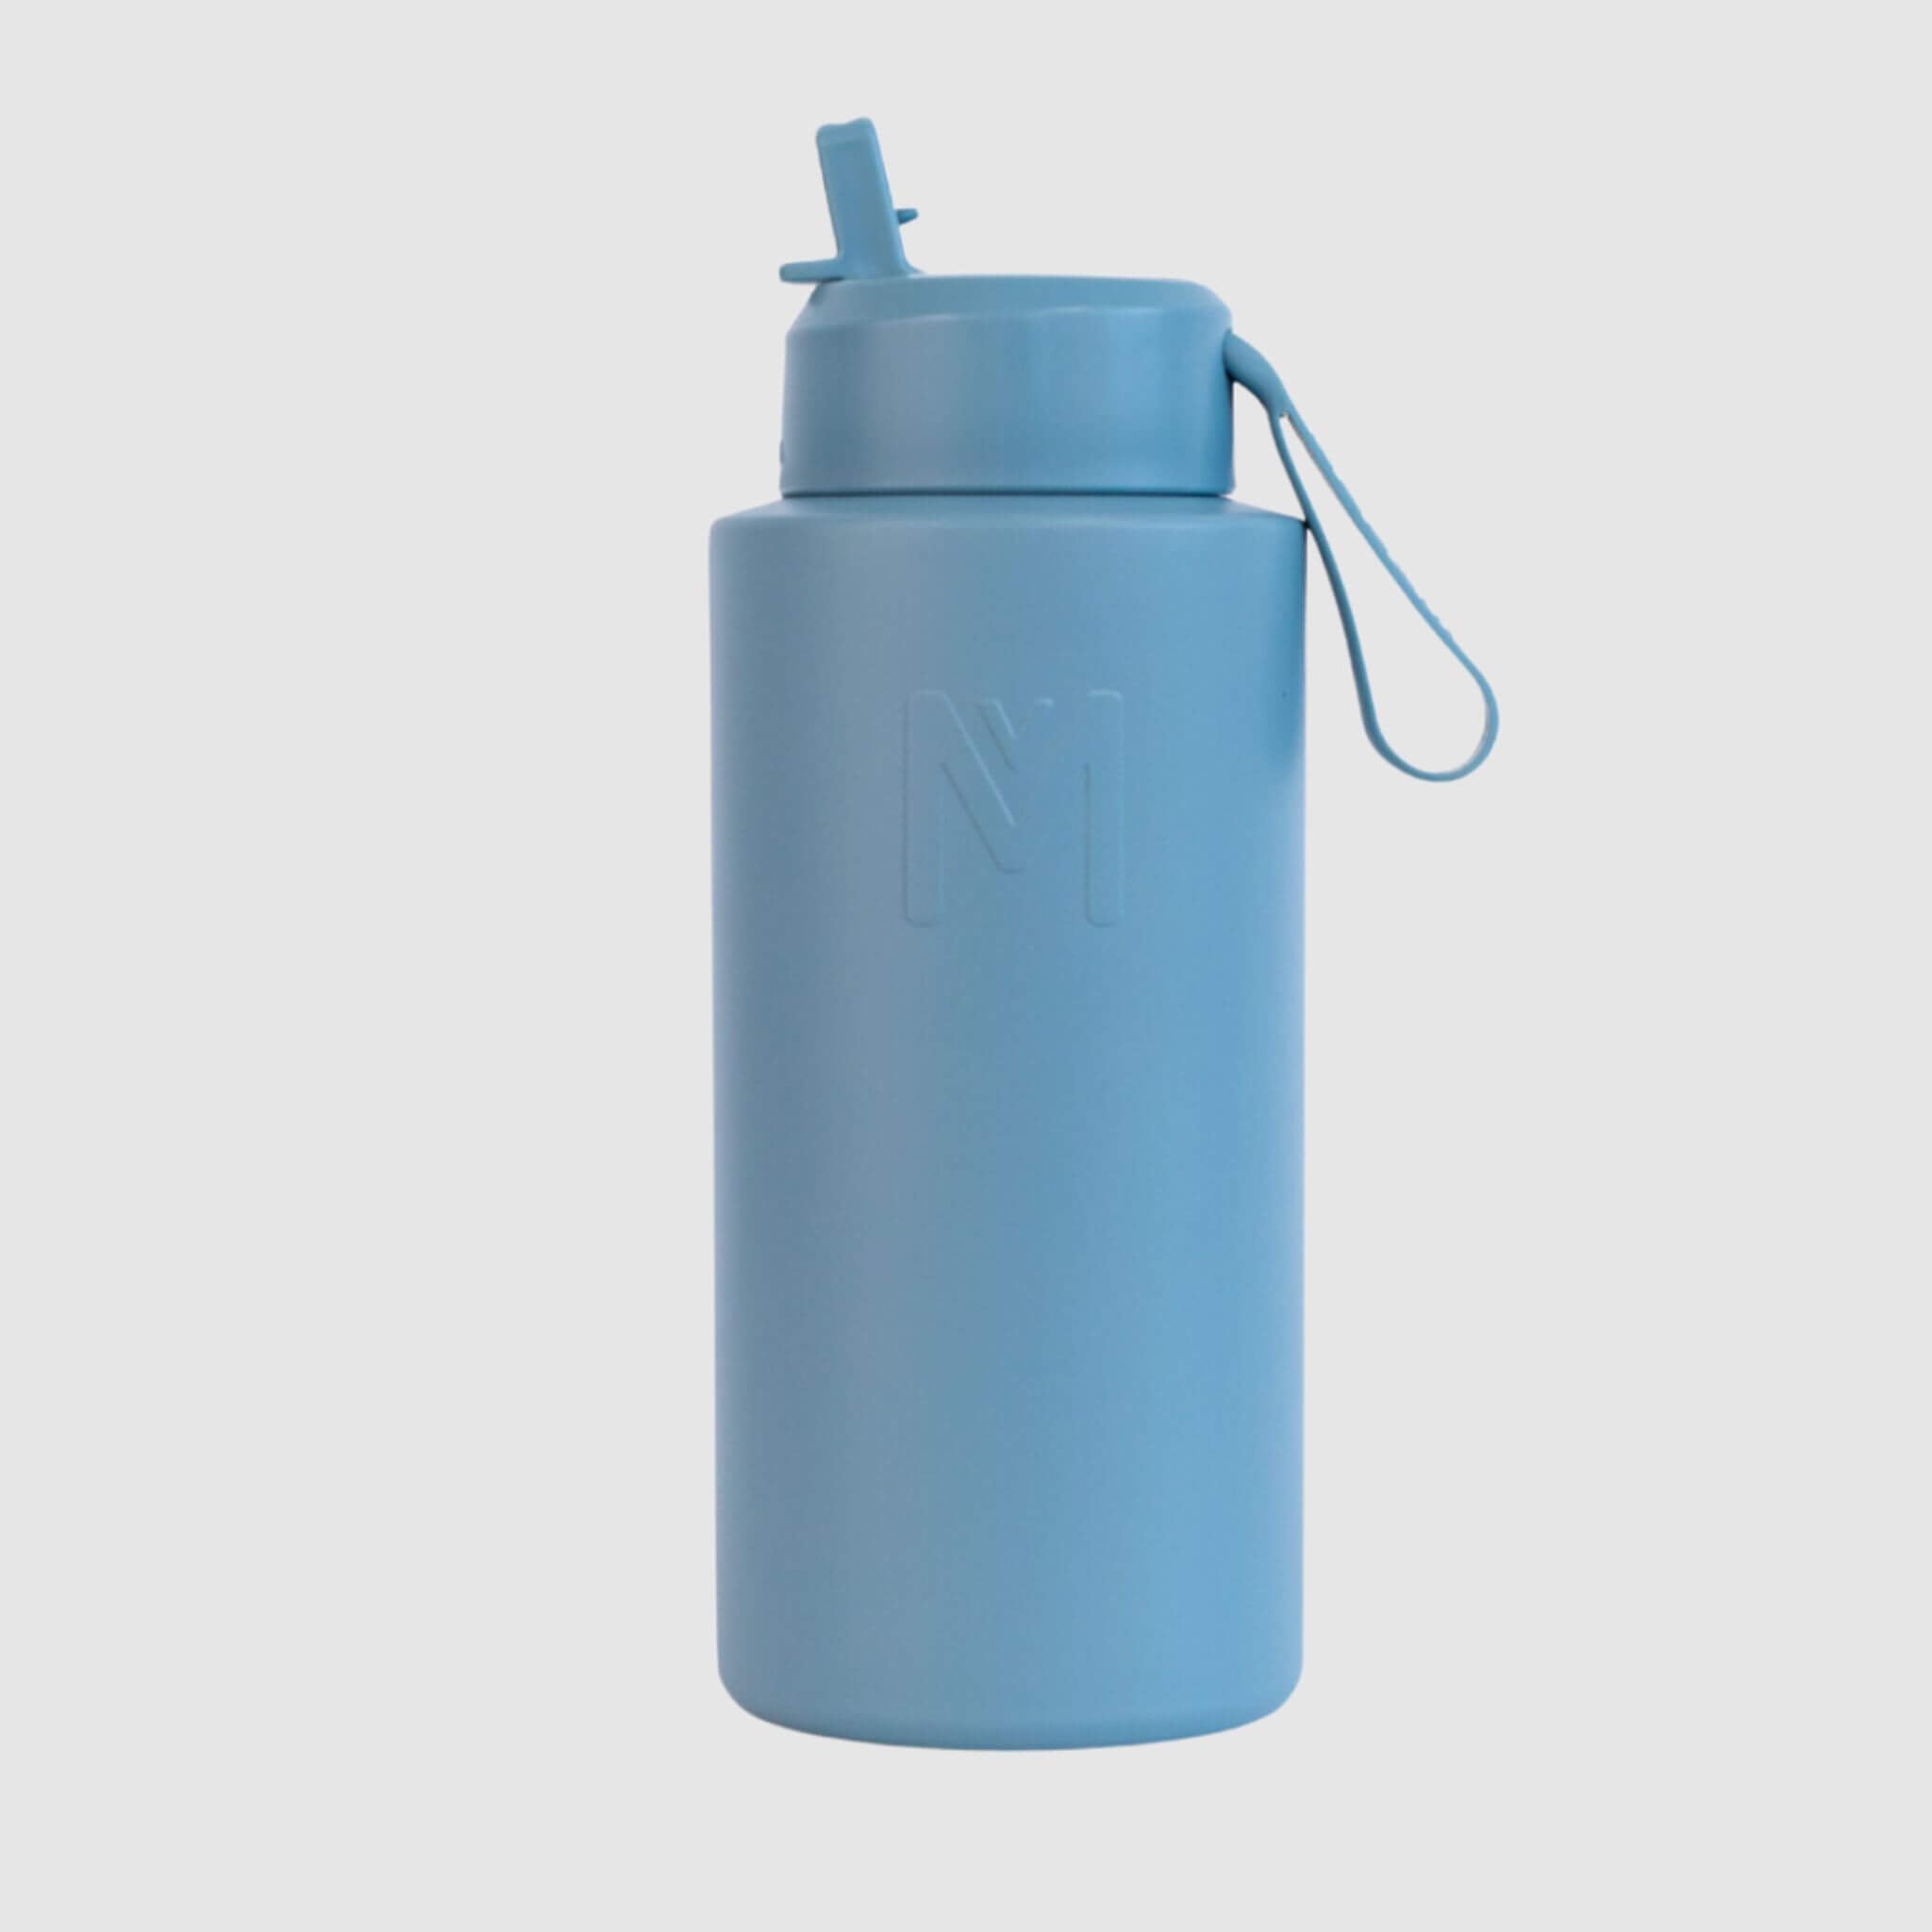 Stone Blue 1 litre montii insulated drink bottle